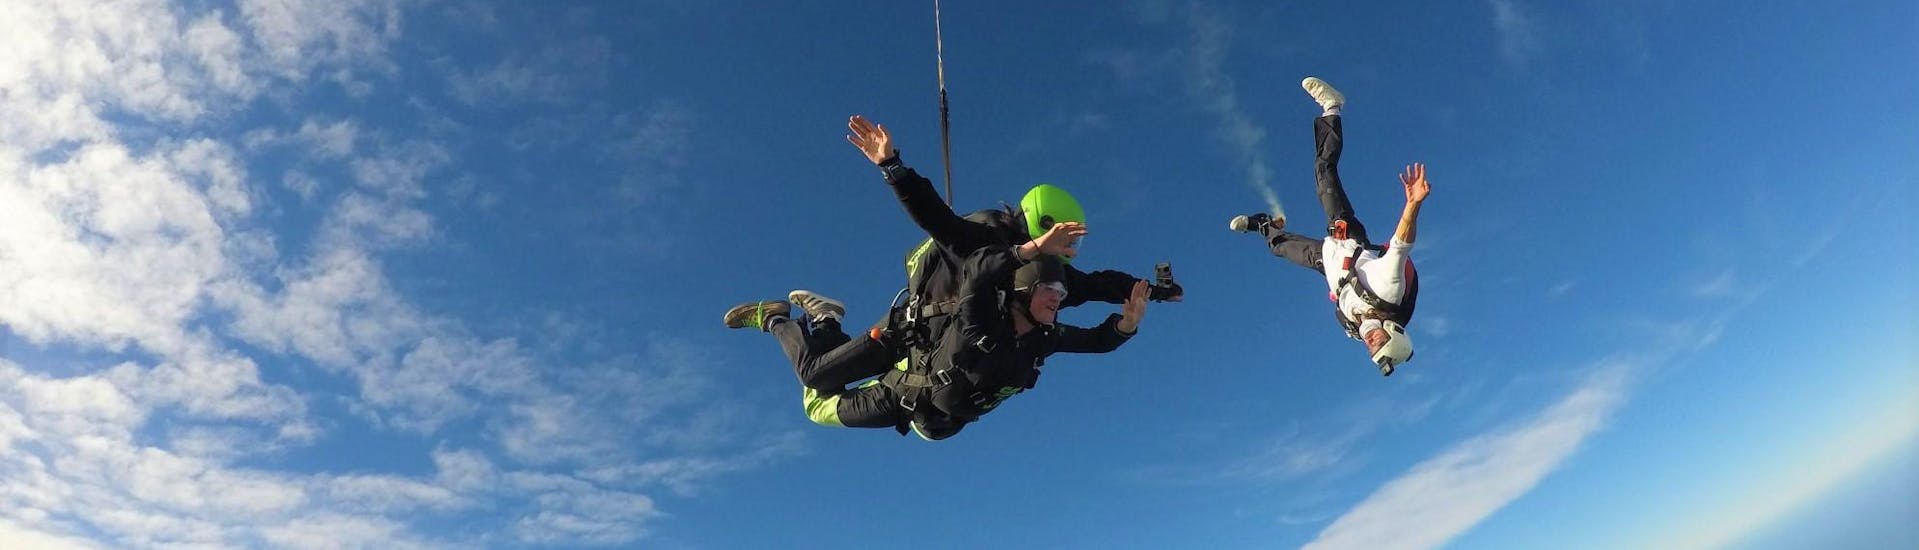 A tandem master is skydiving with a customer from over 6,000ft during a tandem skydive near Christchurch organized by Skydiving Kiwis.